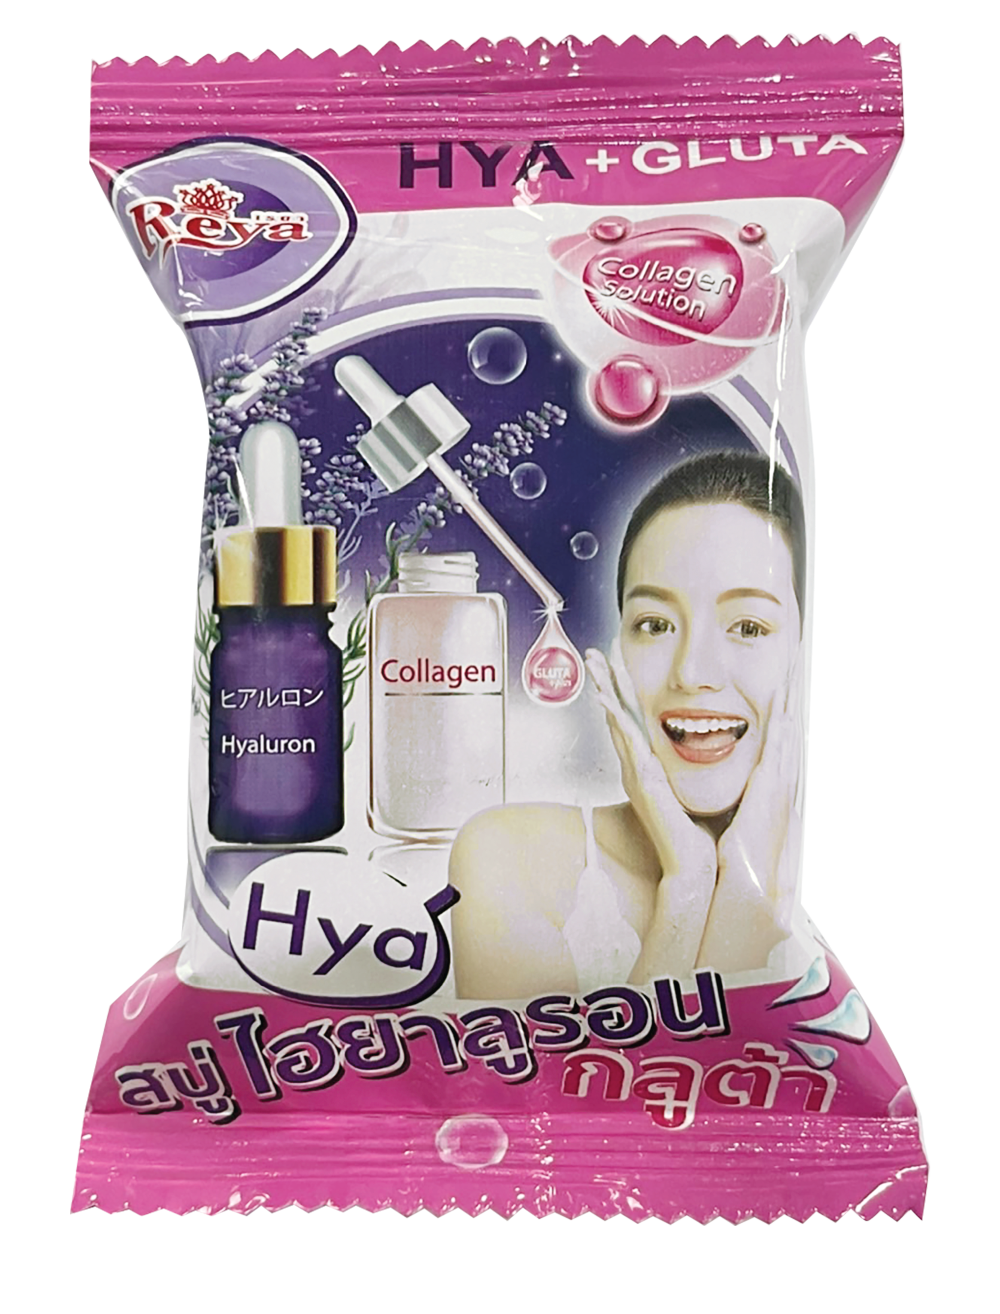 Hyaluron and Gluta Soap